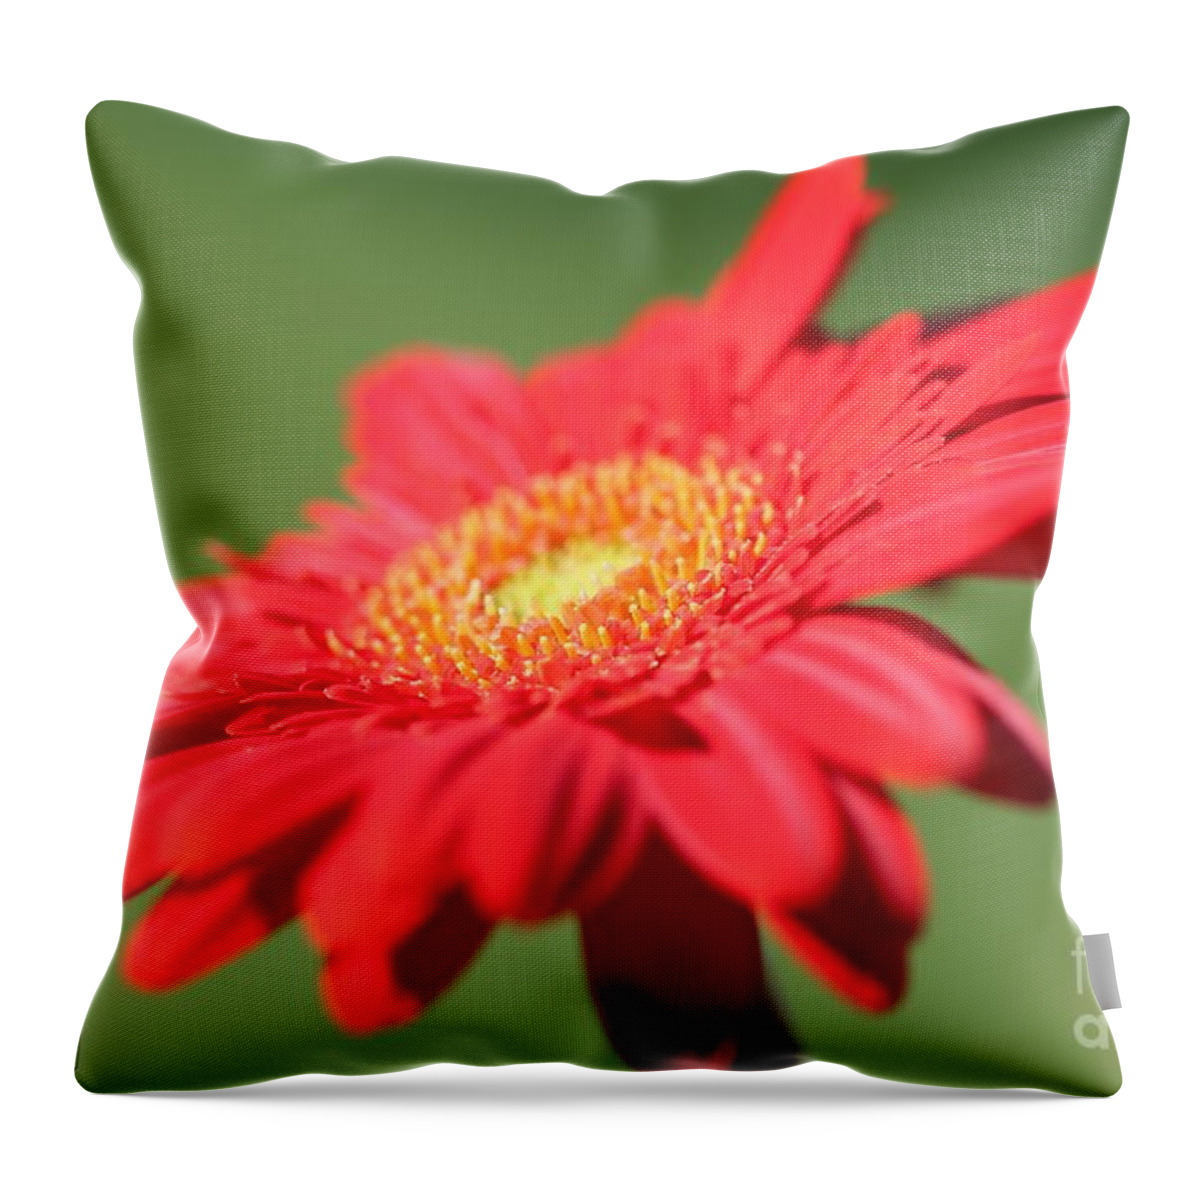 Mccombie Throw Pillow featuring the photograph Mega Revolution Scarlet Red with Light Eye Gerbera Daisy #5 by J McCombie